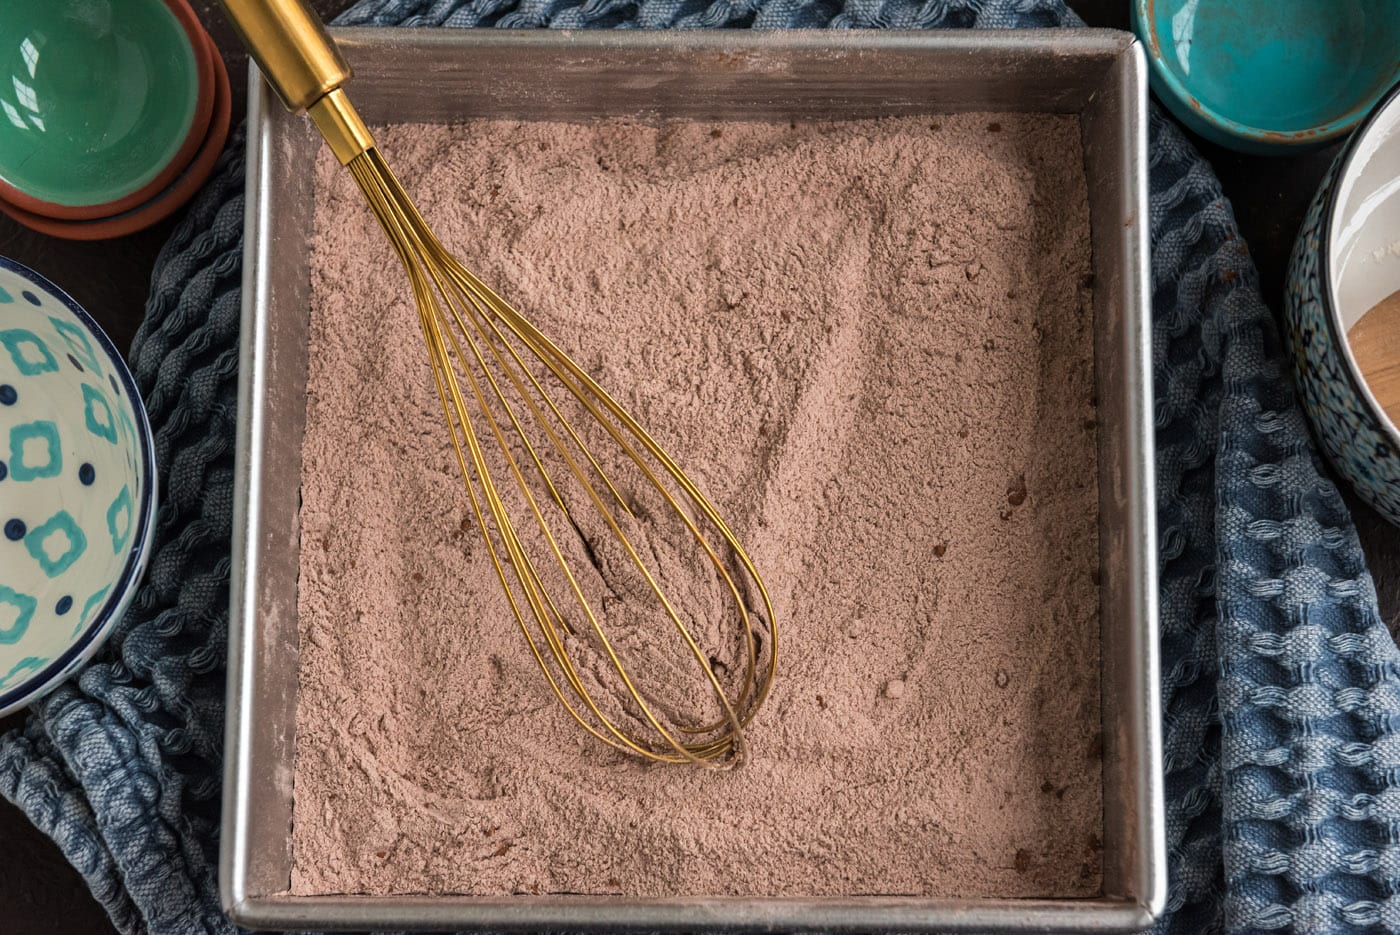 dry cake ingredients in a metal baking pan with a whisk